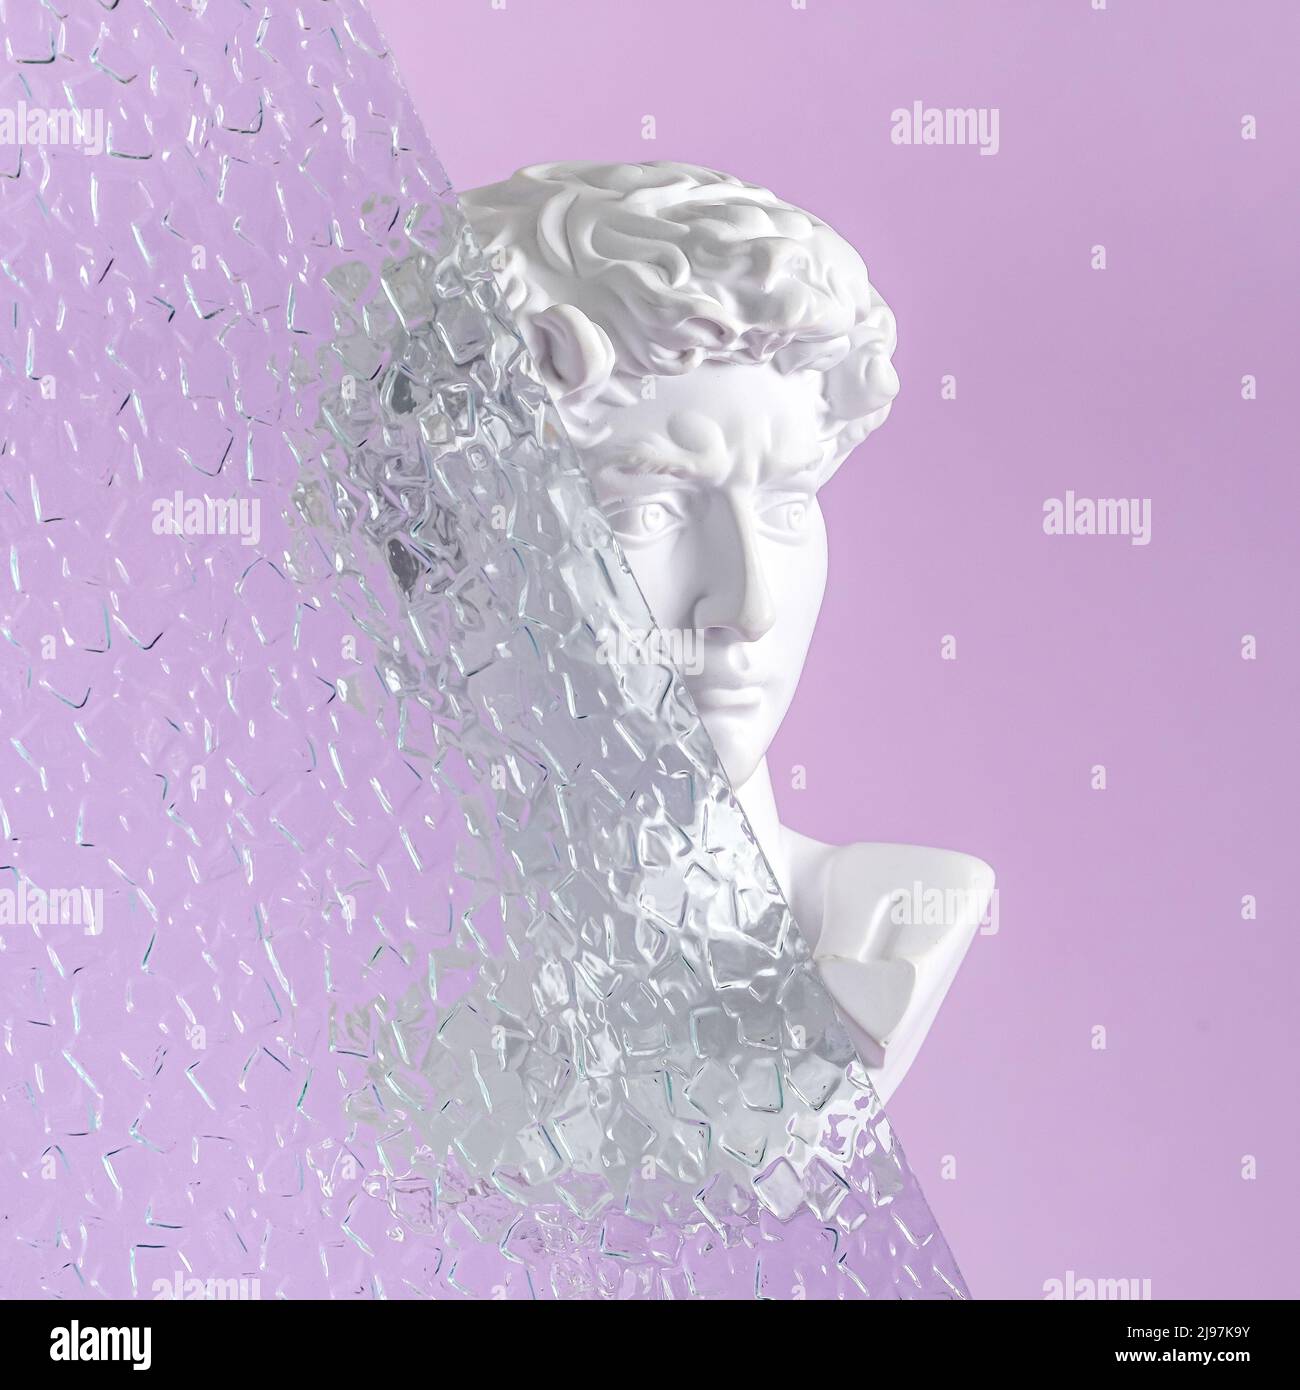 Retro poster David gypsum Michelangelo bust and corrugated glass with mosaics and crystals. Vaporwave minimal creative concept. Stock Photo